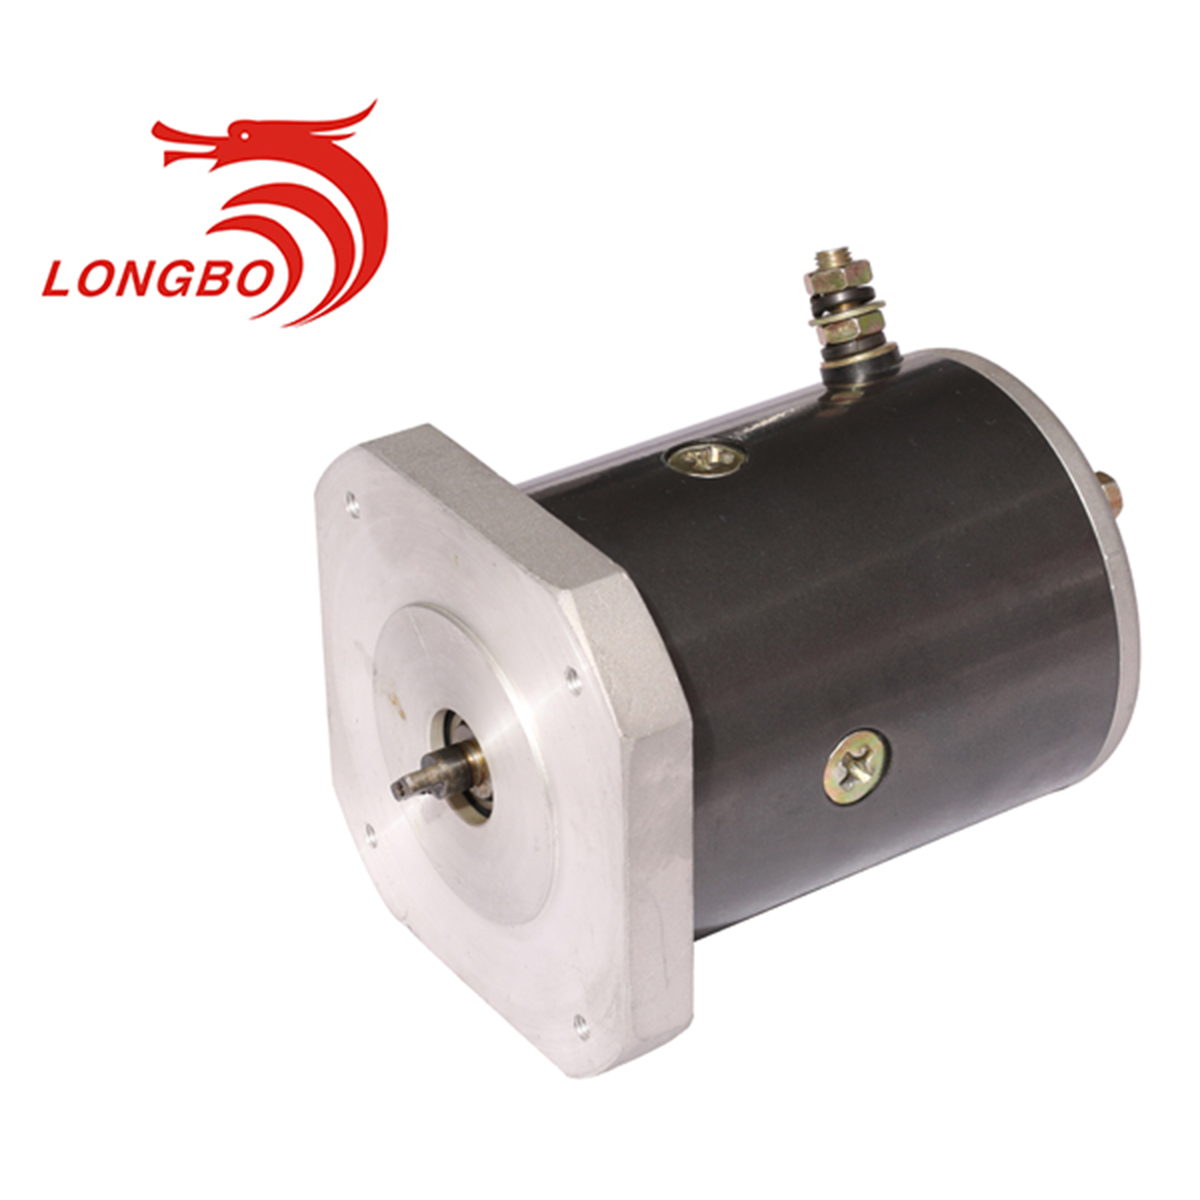 24V 1KW dc electric motor with carbon brush motor HY62027